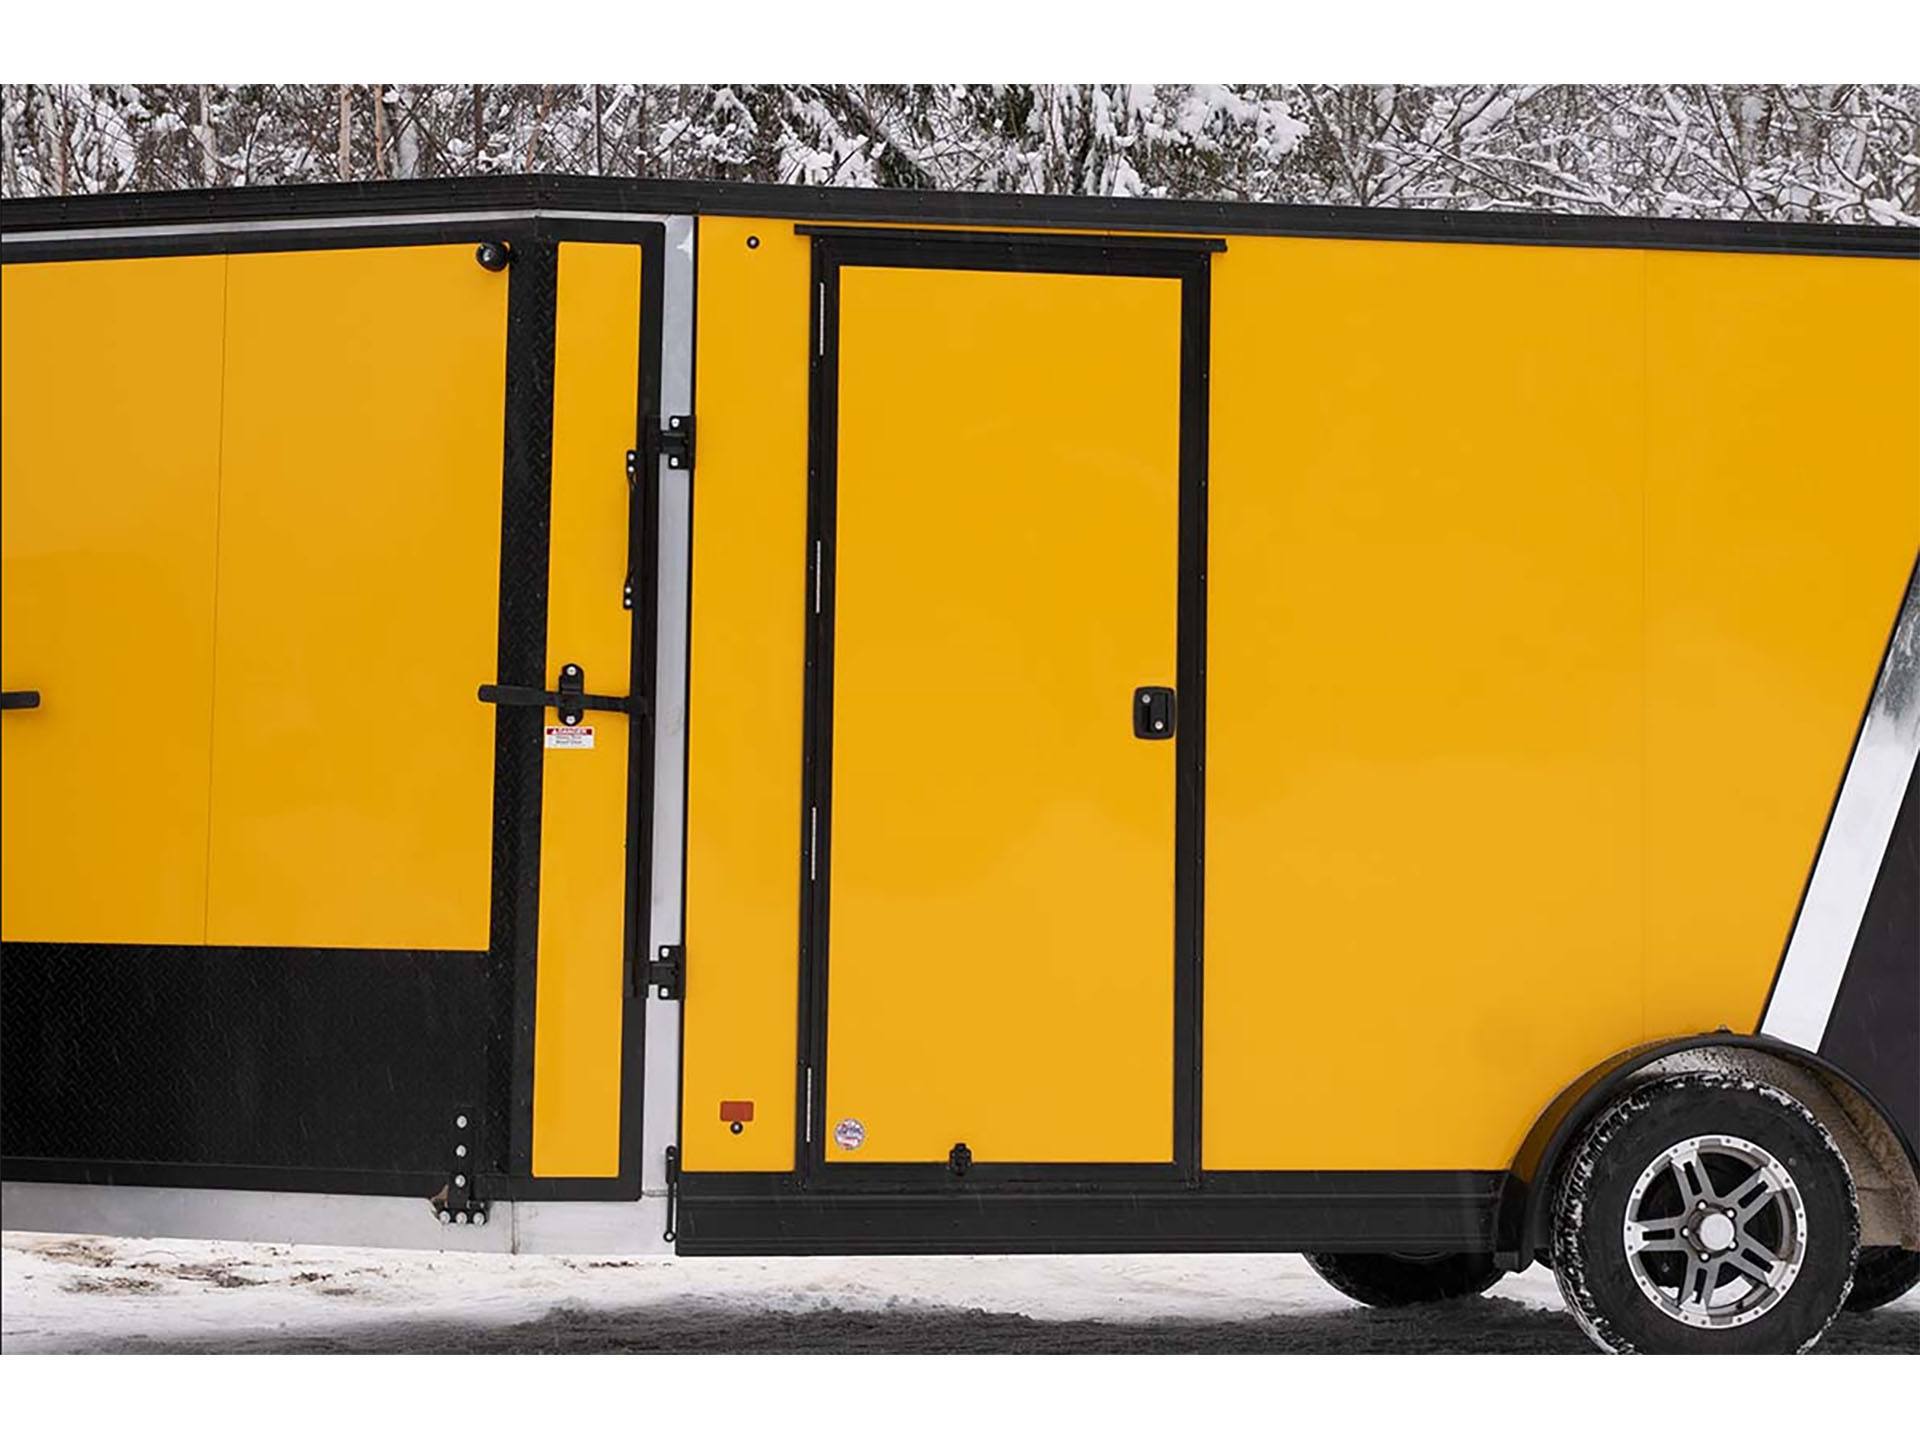 2024 Polaris Trailers Enclosed Cargo Trailers 8.5 ft. Wide - 14 ft. Long in Lancaster, Texas - Photo 6